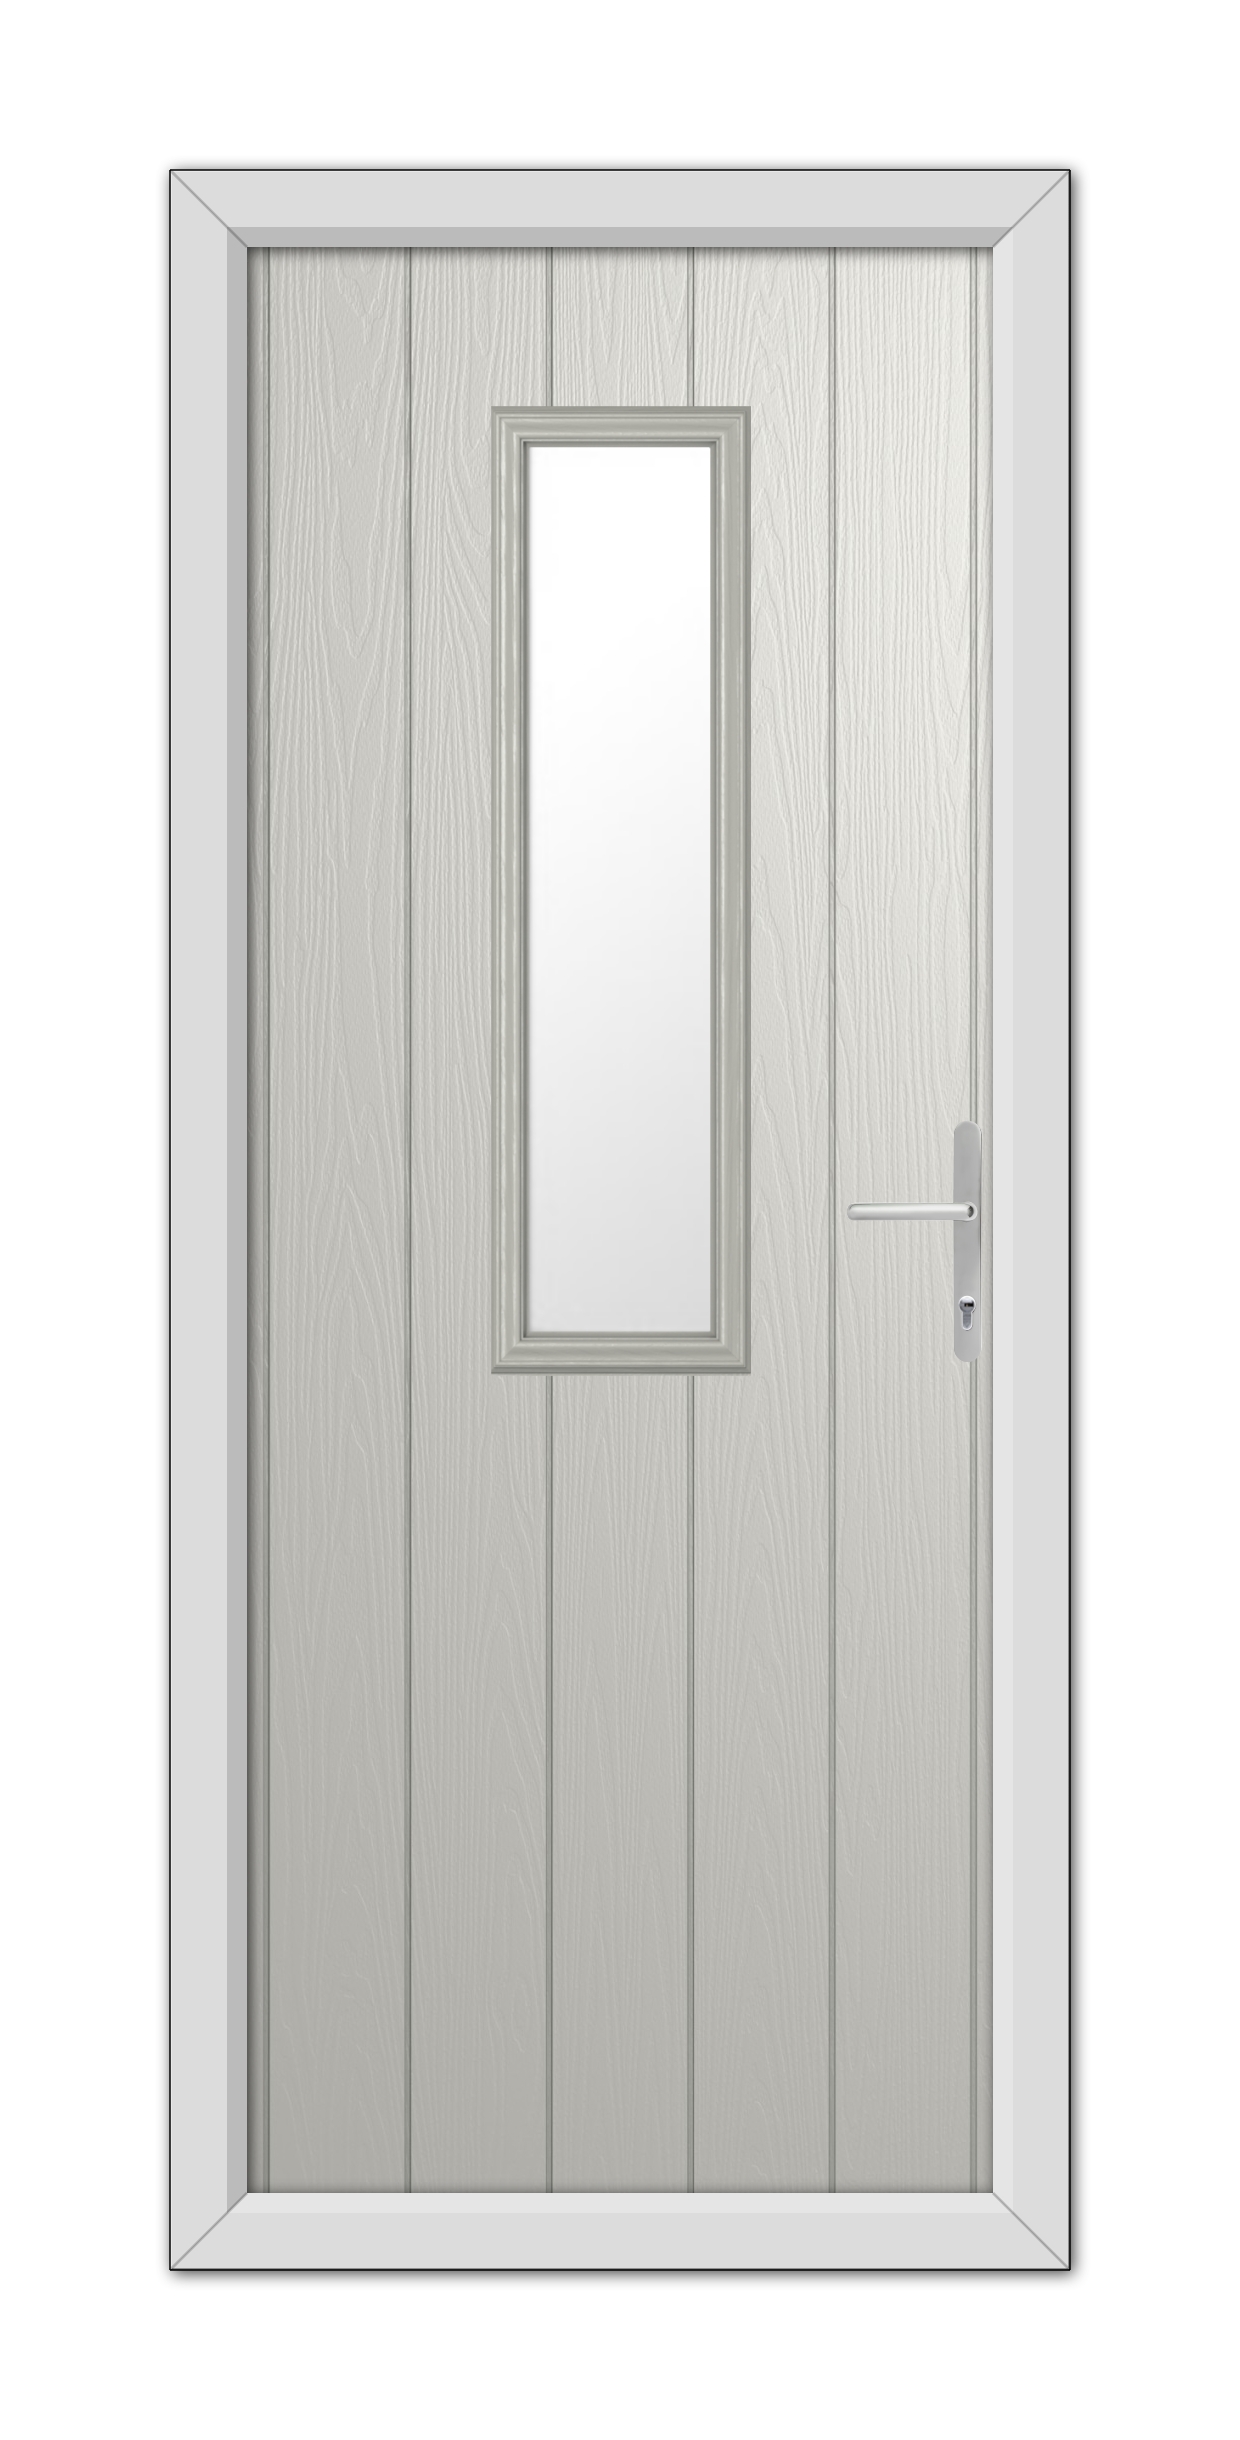 A modern Agate Grey Mowbray Composite Door 48mm Timber Core with a vertical rectangular window and a silver handle, set within a frame.